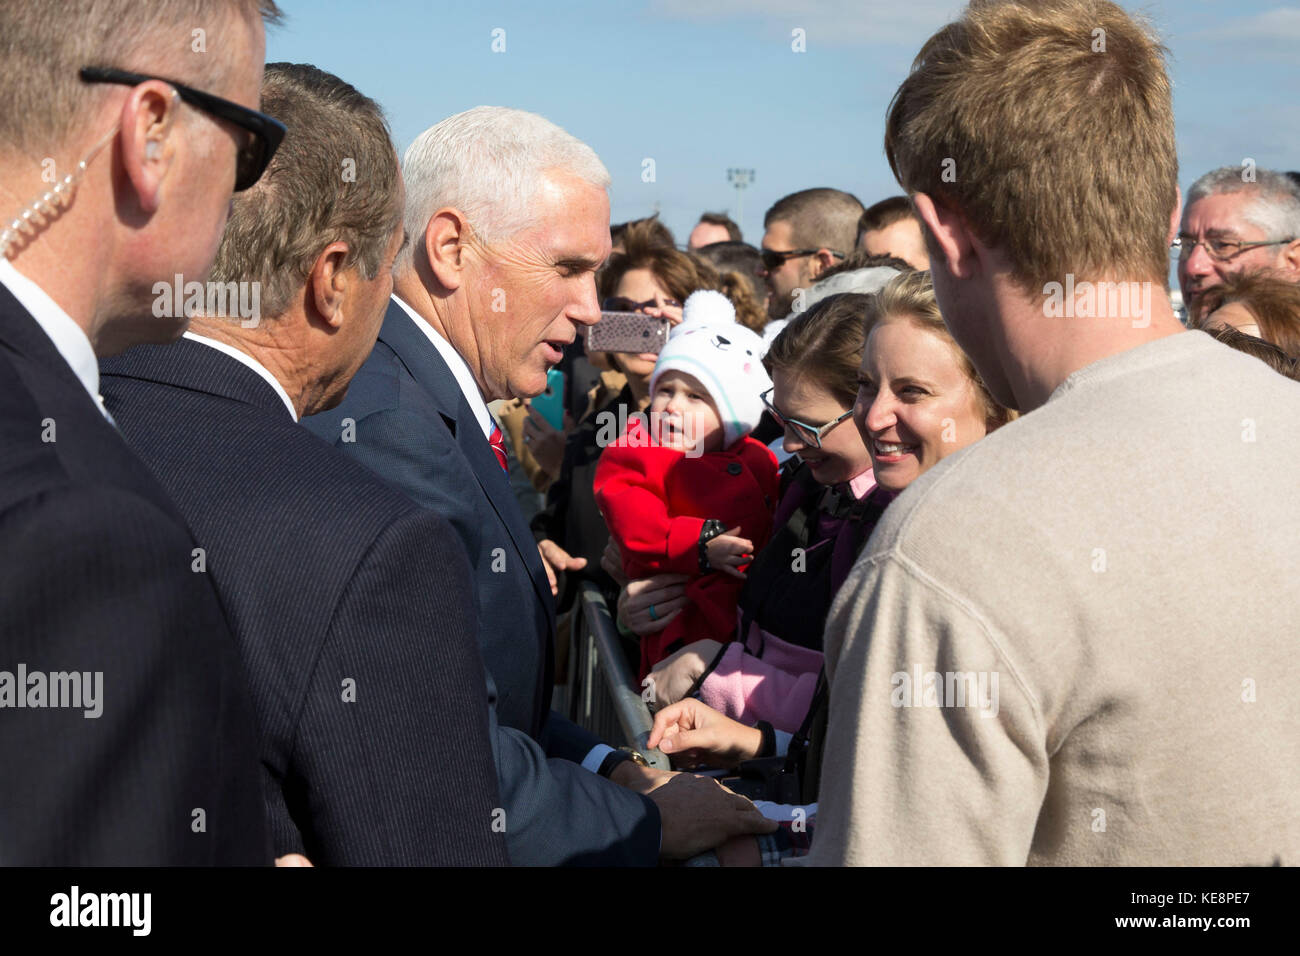 U.S. Vice President Mike Pence, center, greets supporters on arrival at Buffalo Niagara International Airport October 17, 2017 in Buffalo, New York. Pence held a tax cut discussion and then attended a Republican fundraiser for Congressmen Chris Collins. Stock Photo